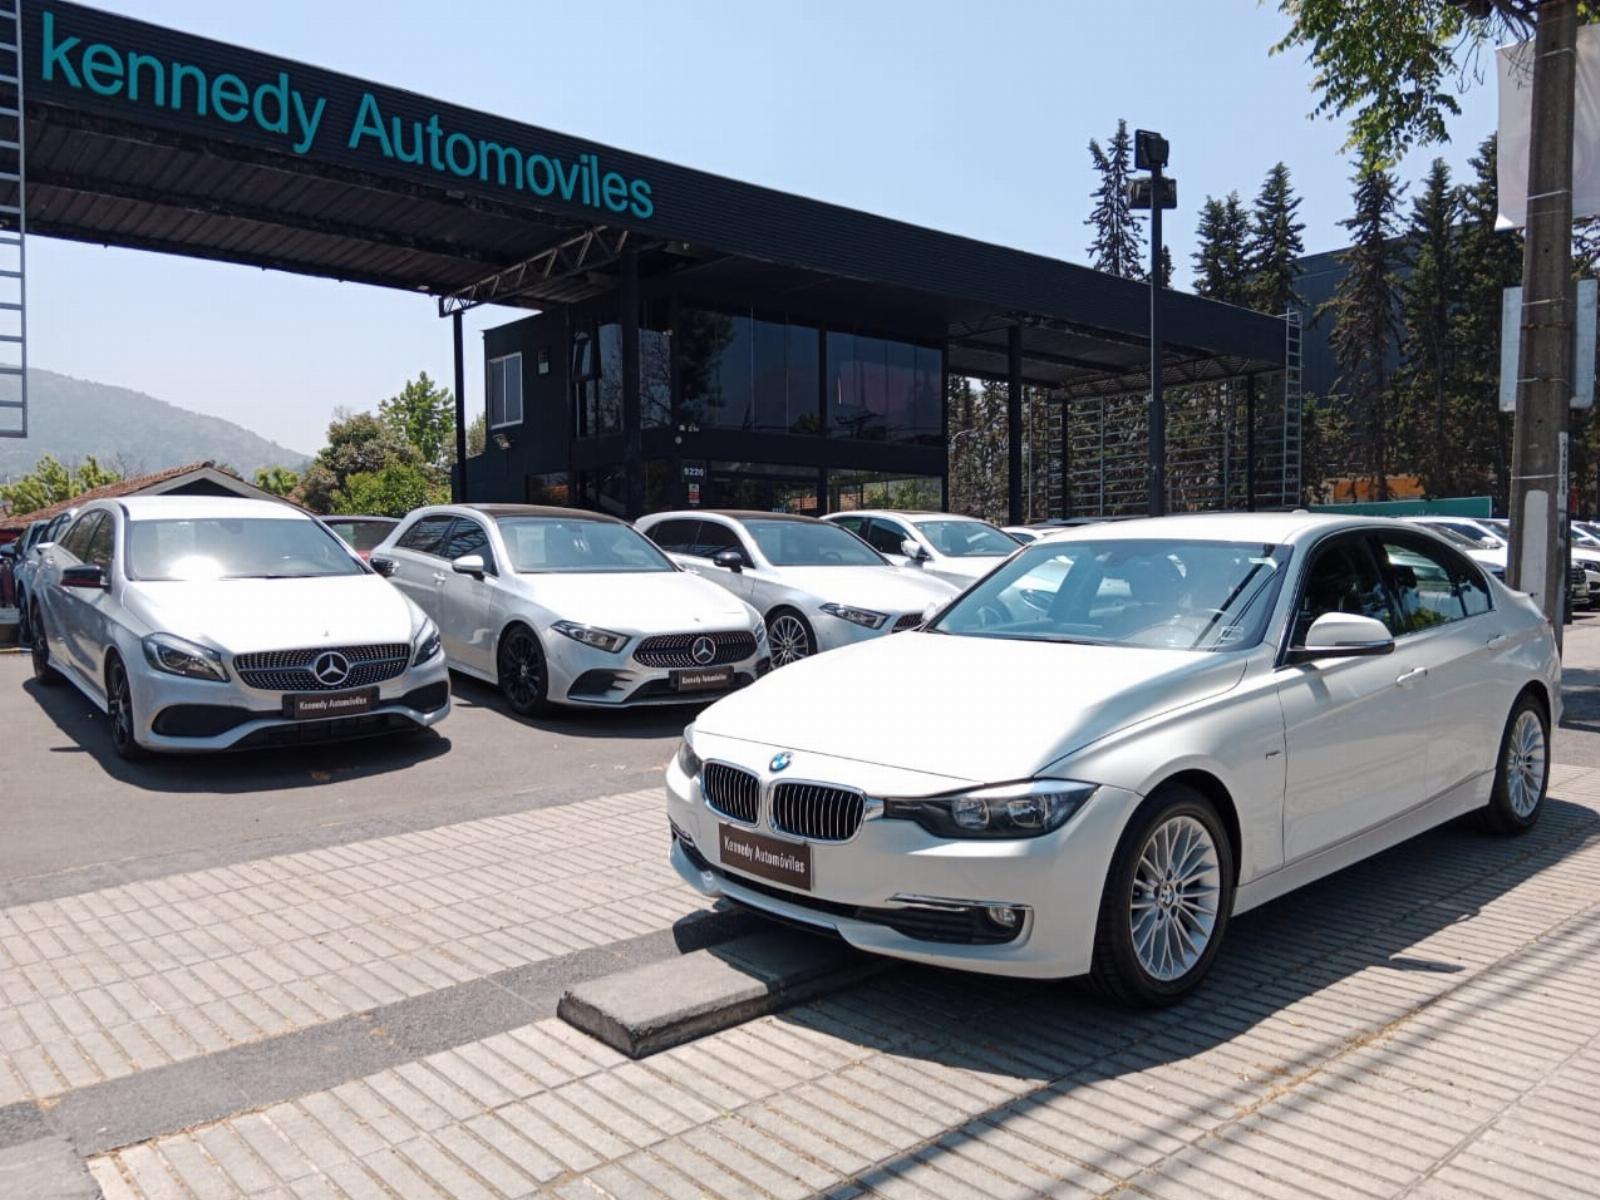 BMW 316I 1.6 Auto 2013 Impecable - KENNEDY AUTOMOVILES